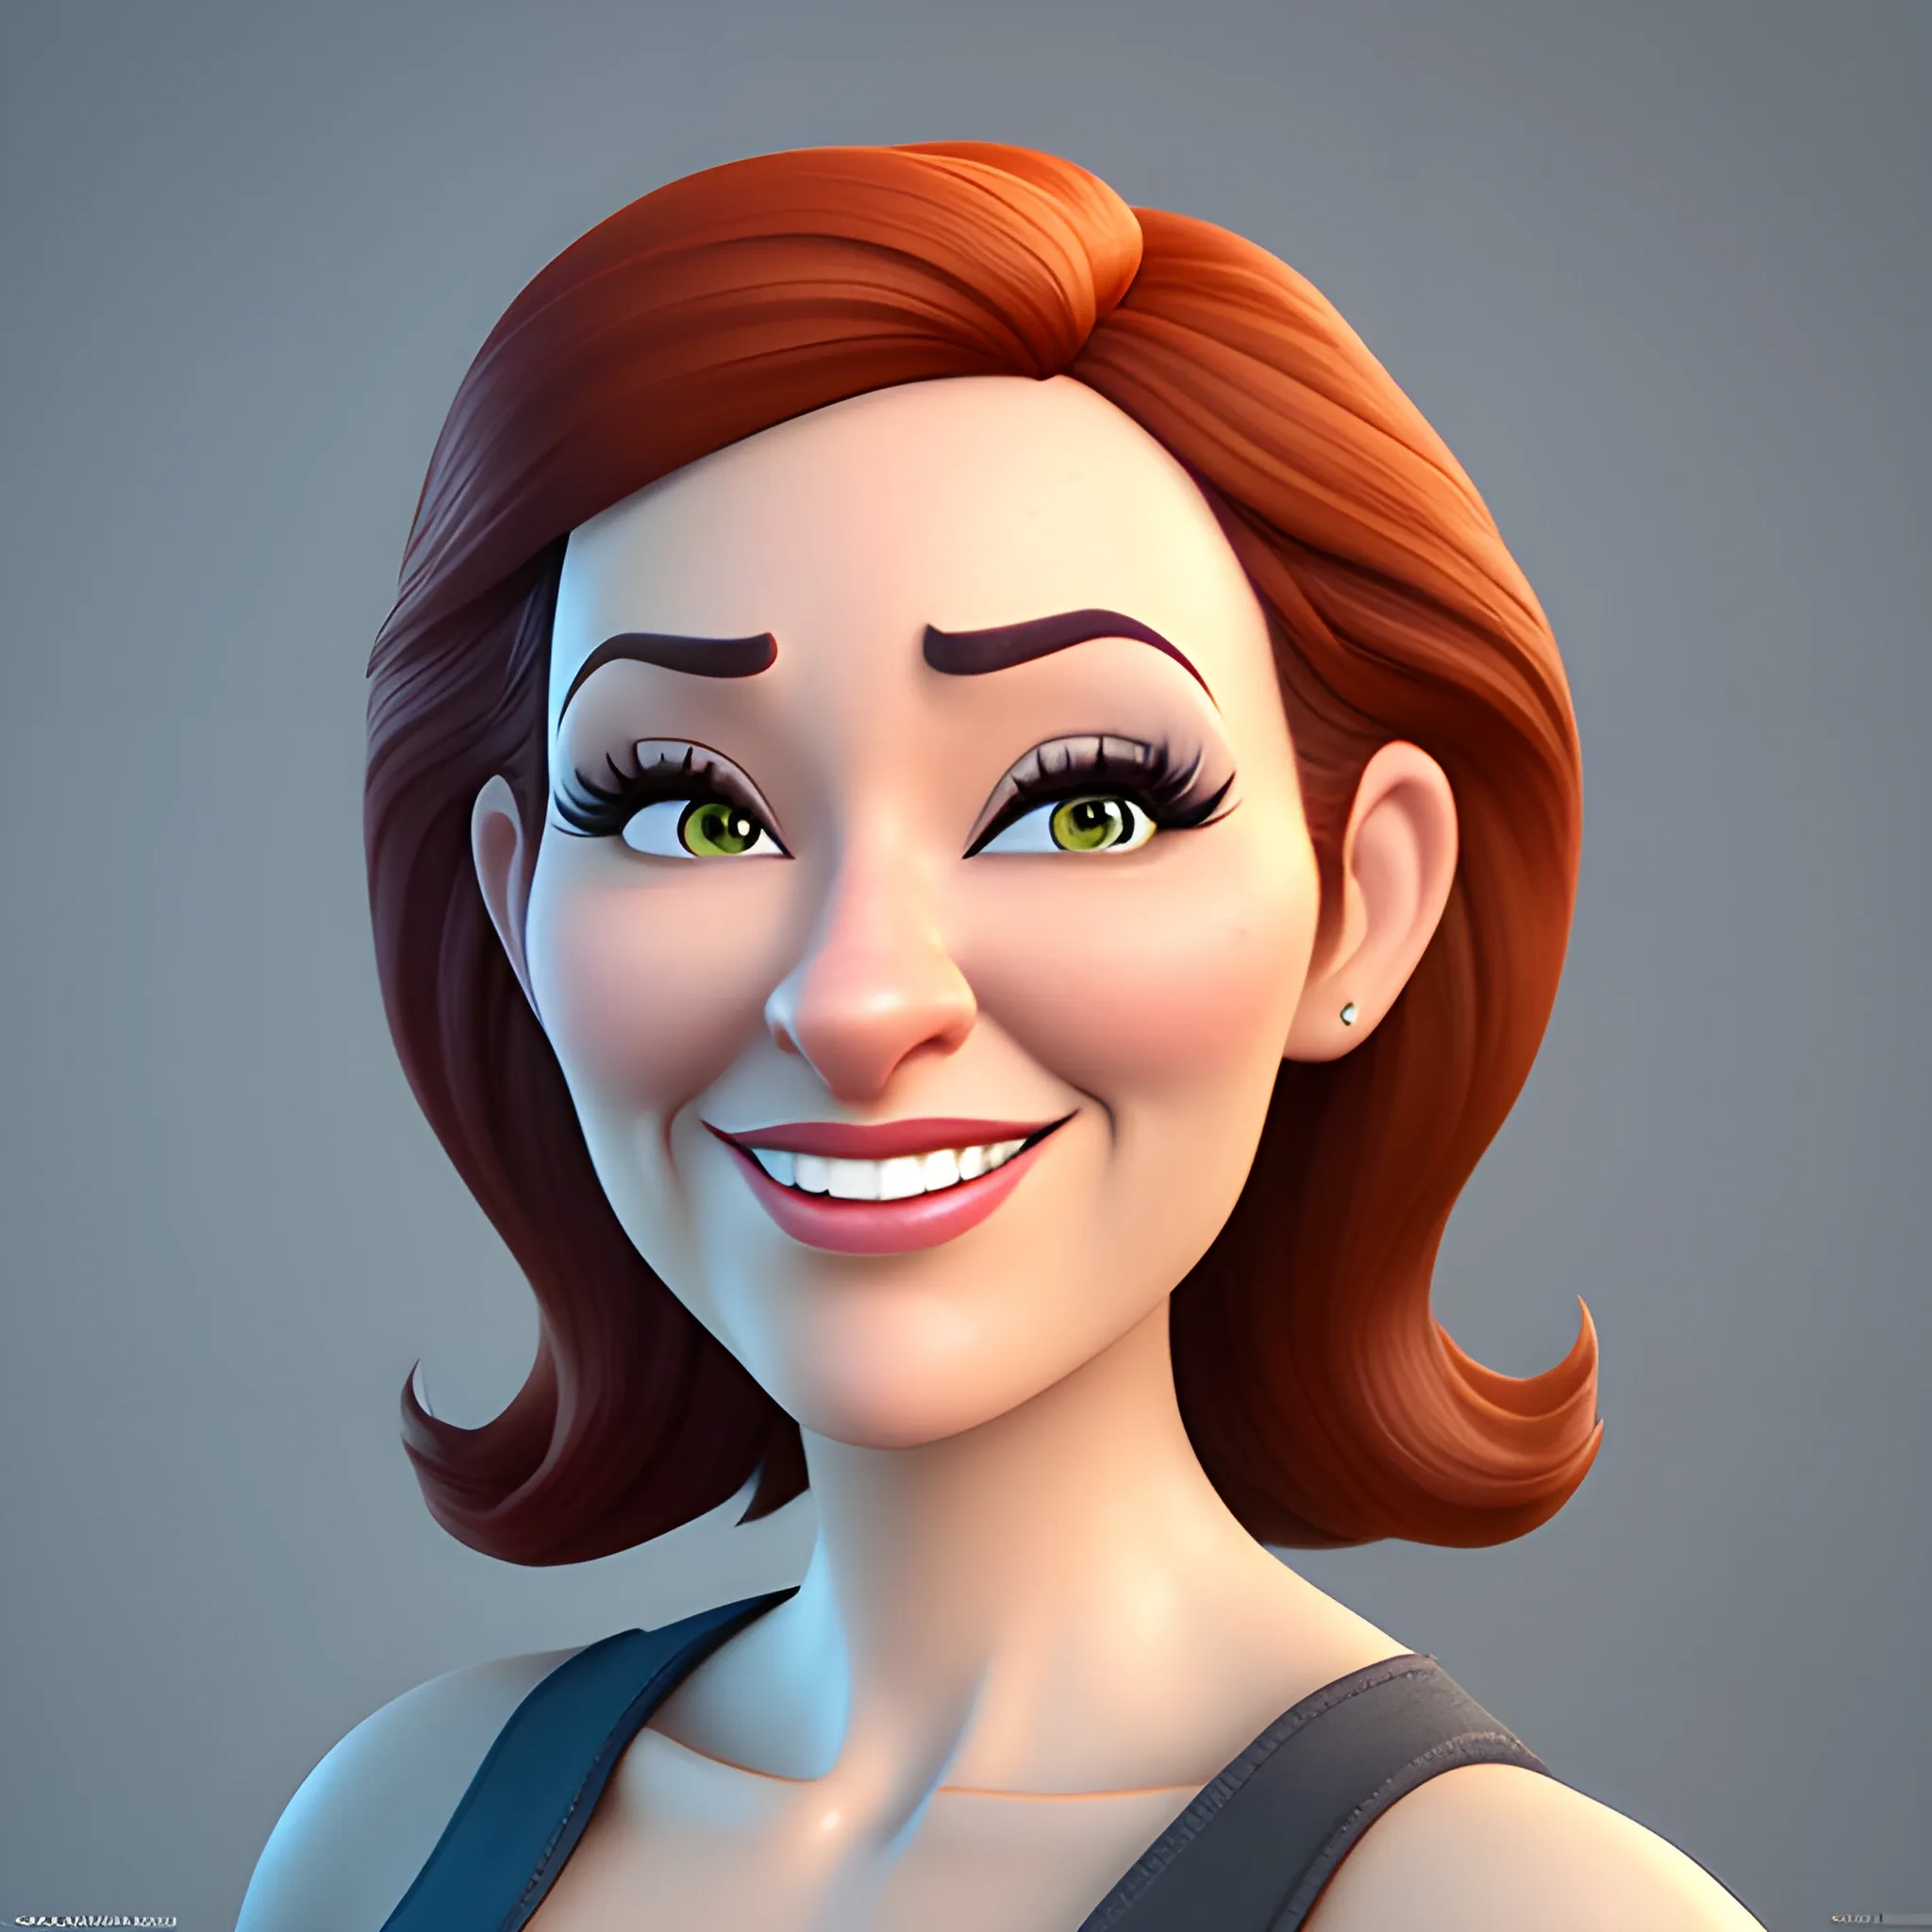  cheerful girl in her 20's, pixar movie. 3 d rendering. unreal engine. amazing likeness. very detailed. cartoon caricature, portrait style , 3D